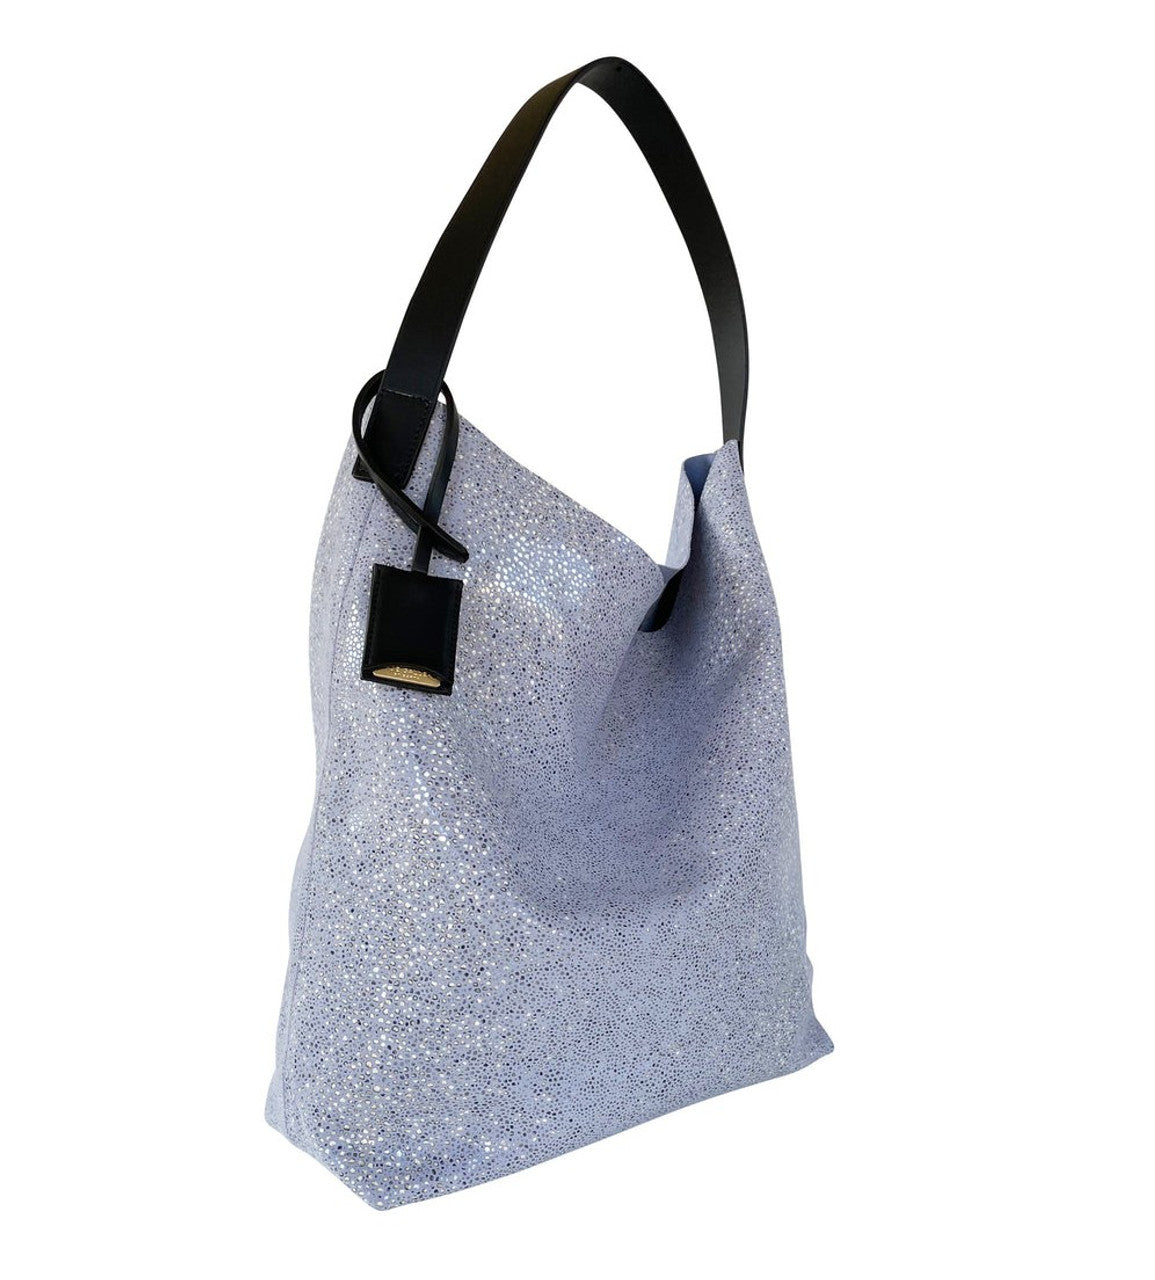 LINDE GALLERY TOTE BAG PRINTED SUEDE - MEDIUM (Available in 2 Colors)